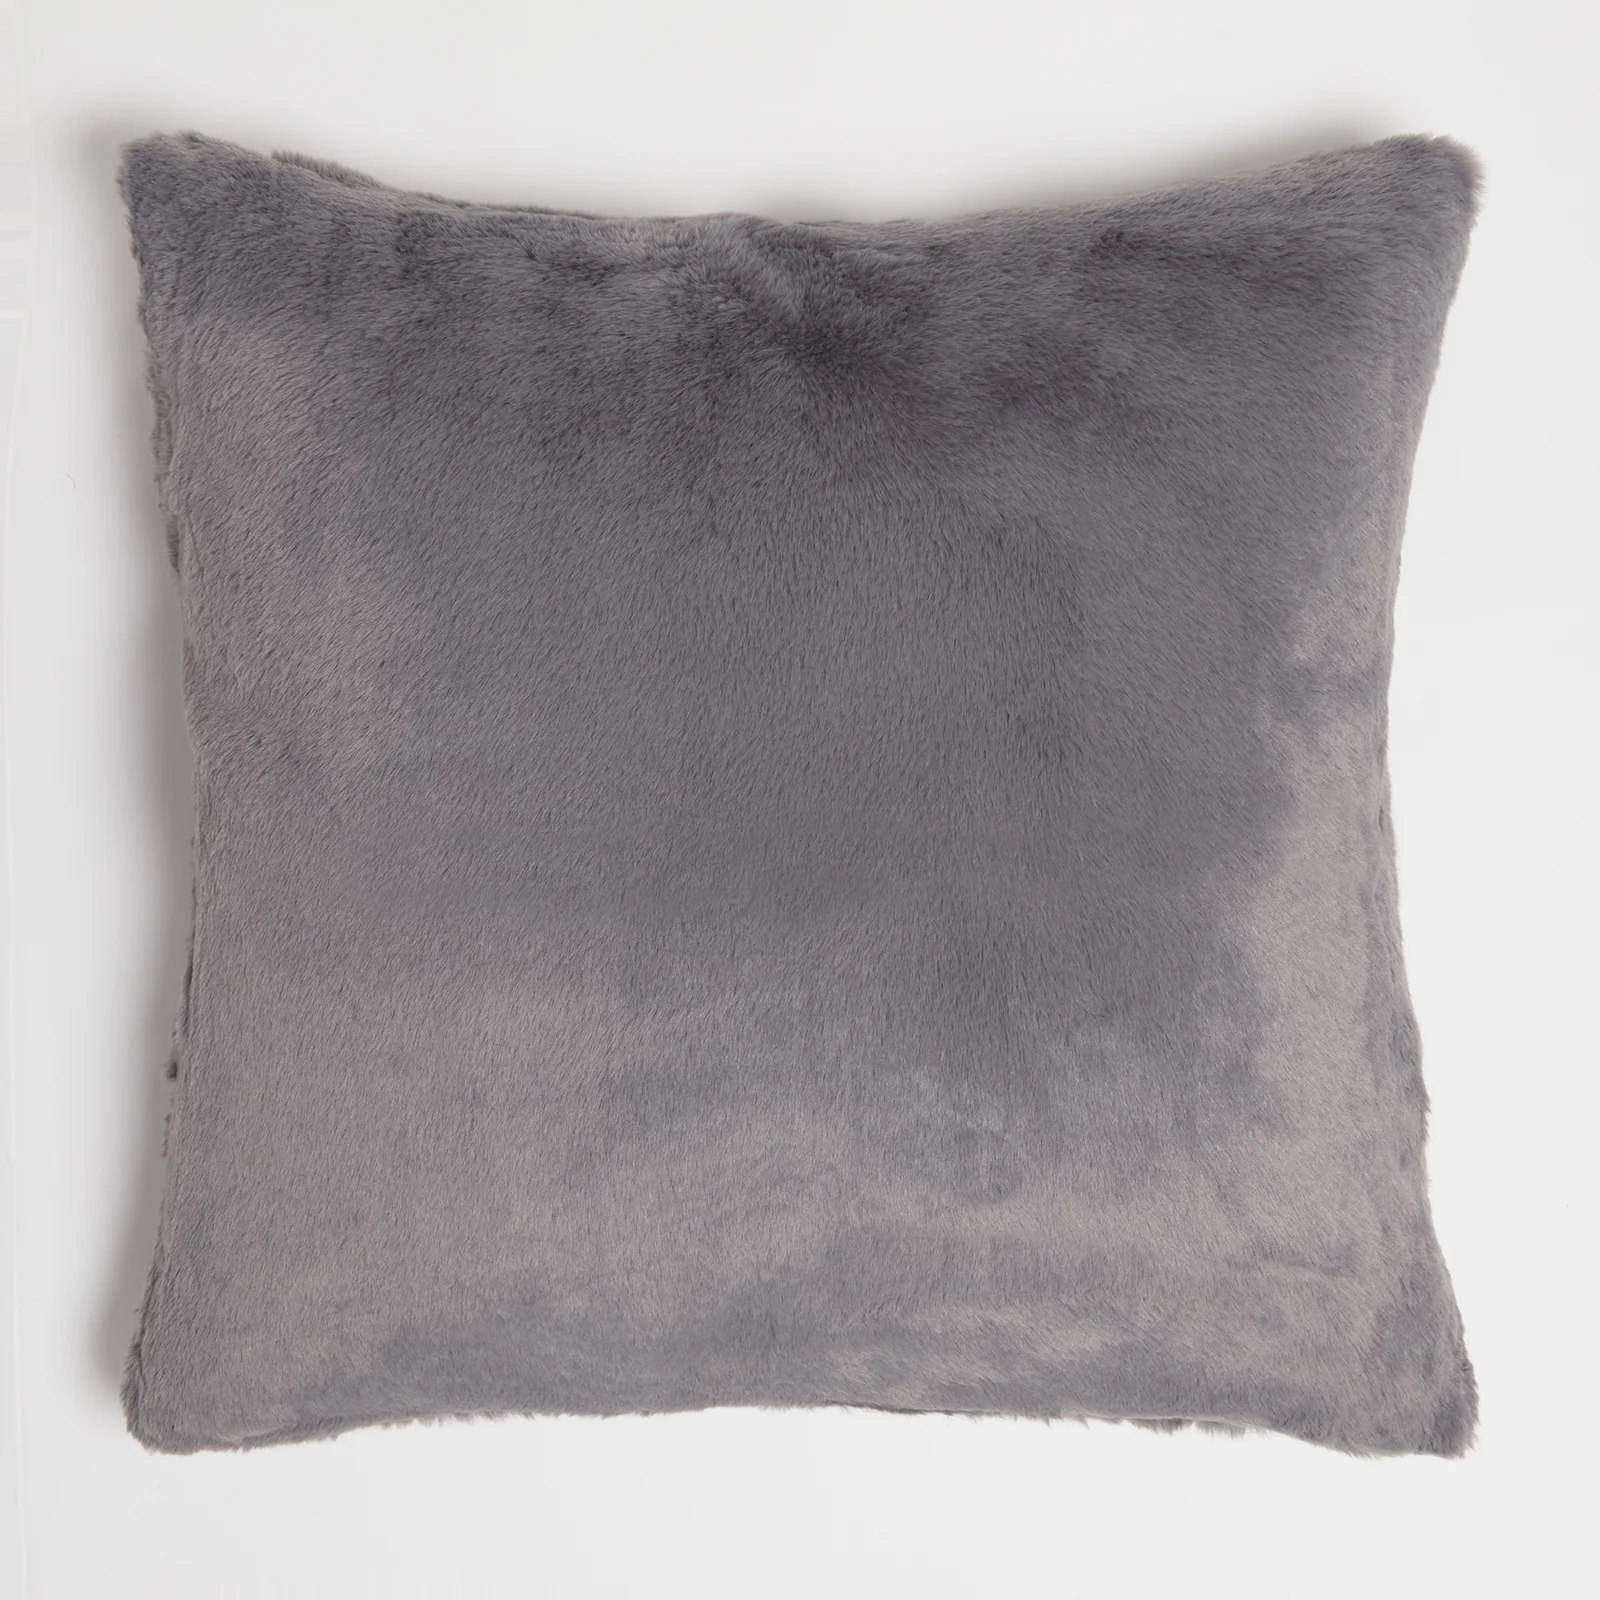 ïn home Recycled Polyester Faux Fur Cushion - Dark Grey Image 1